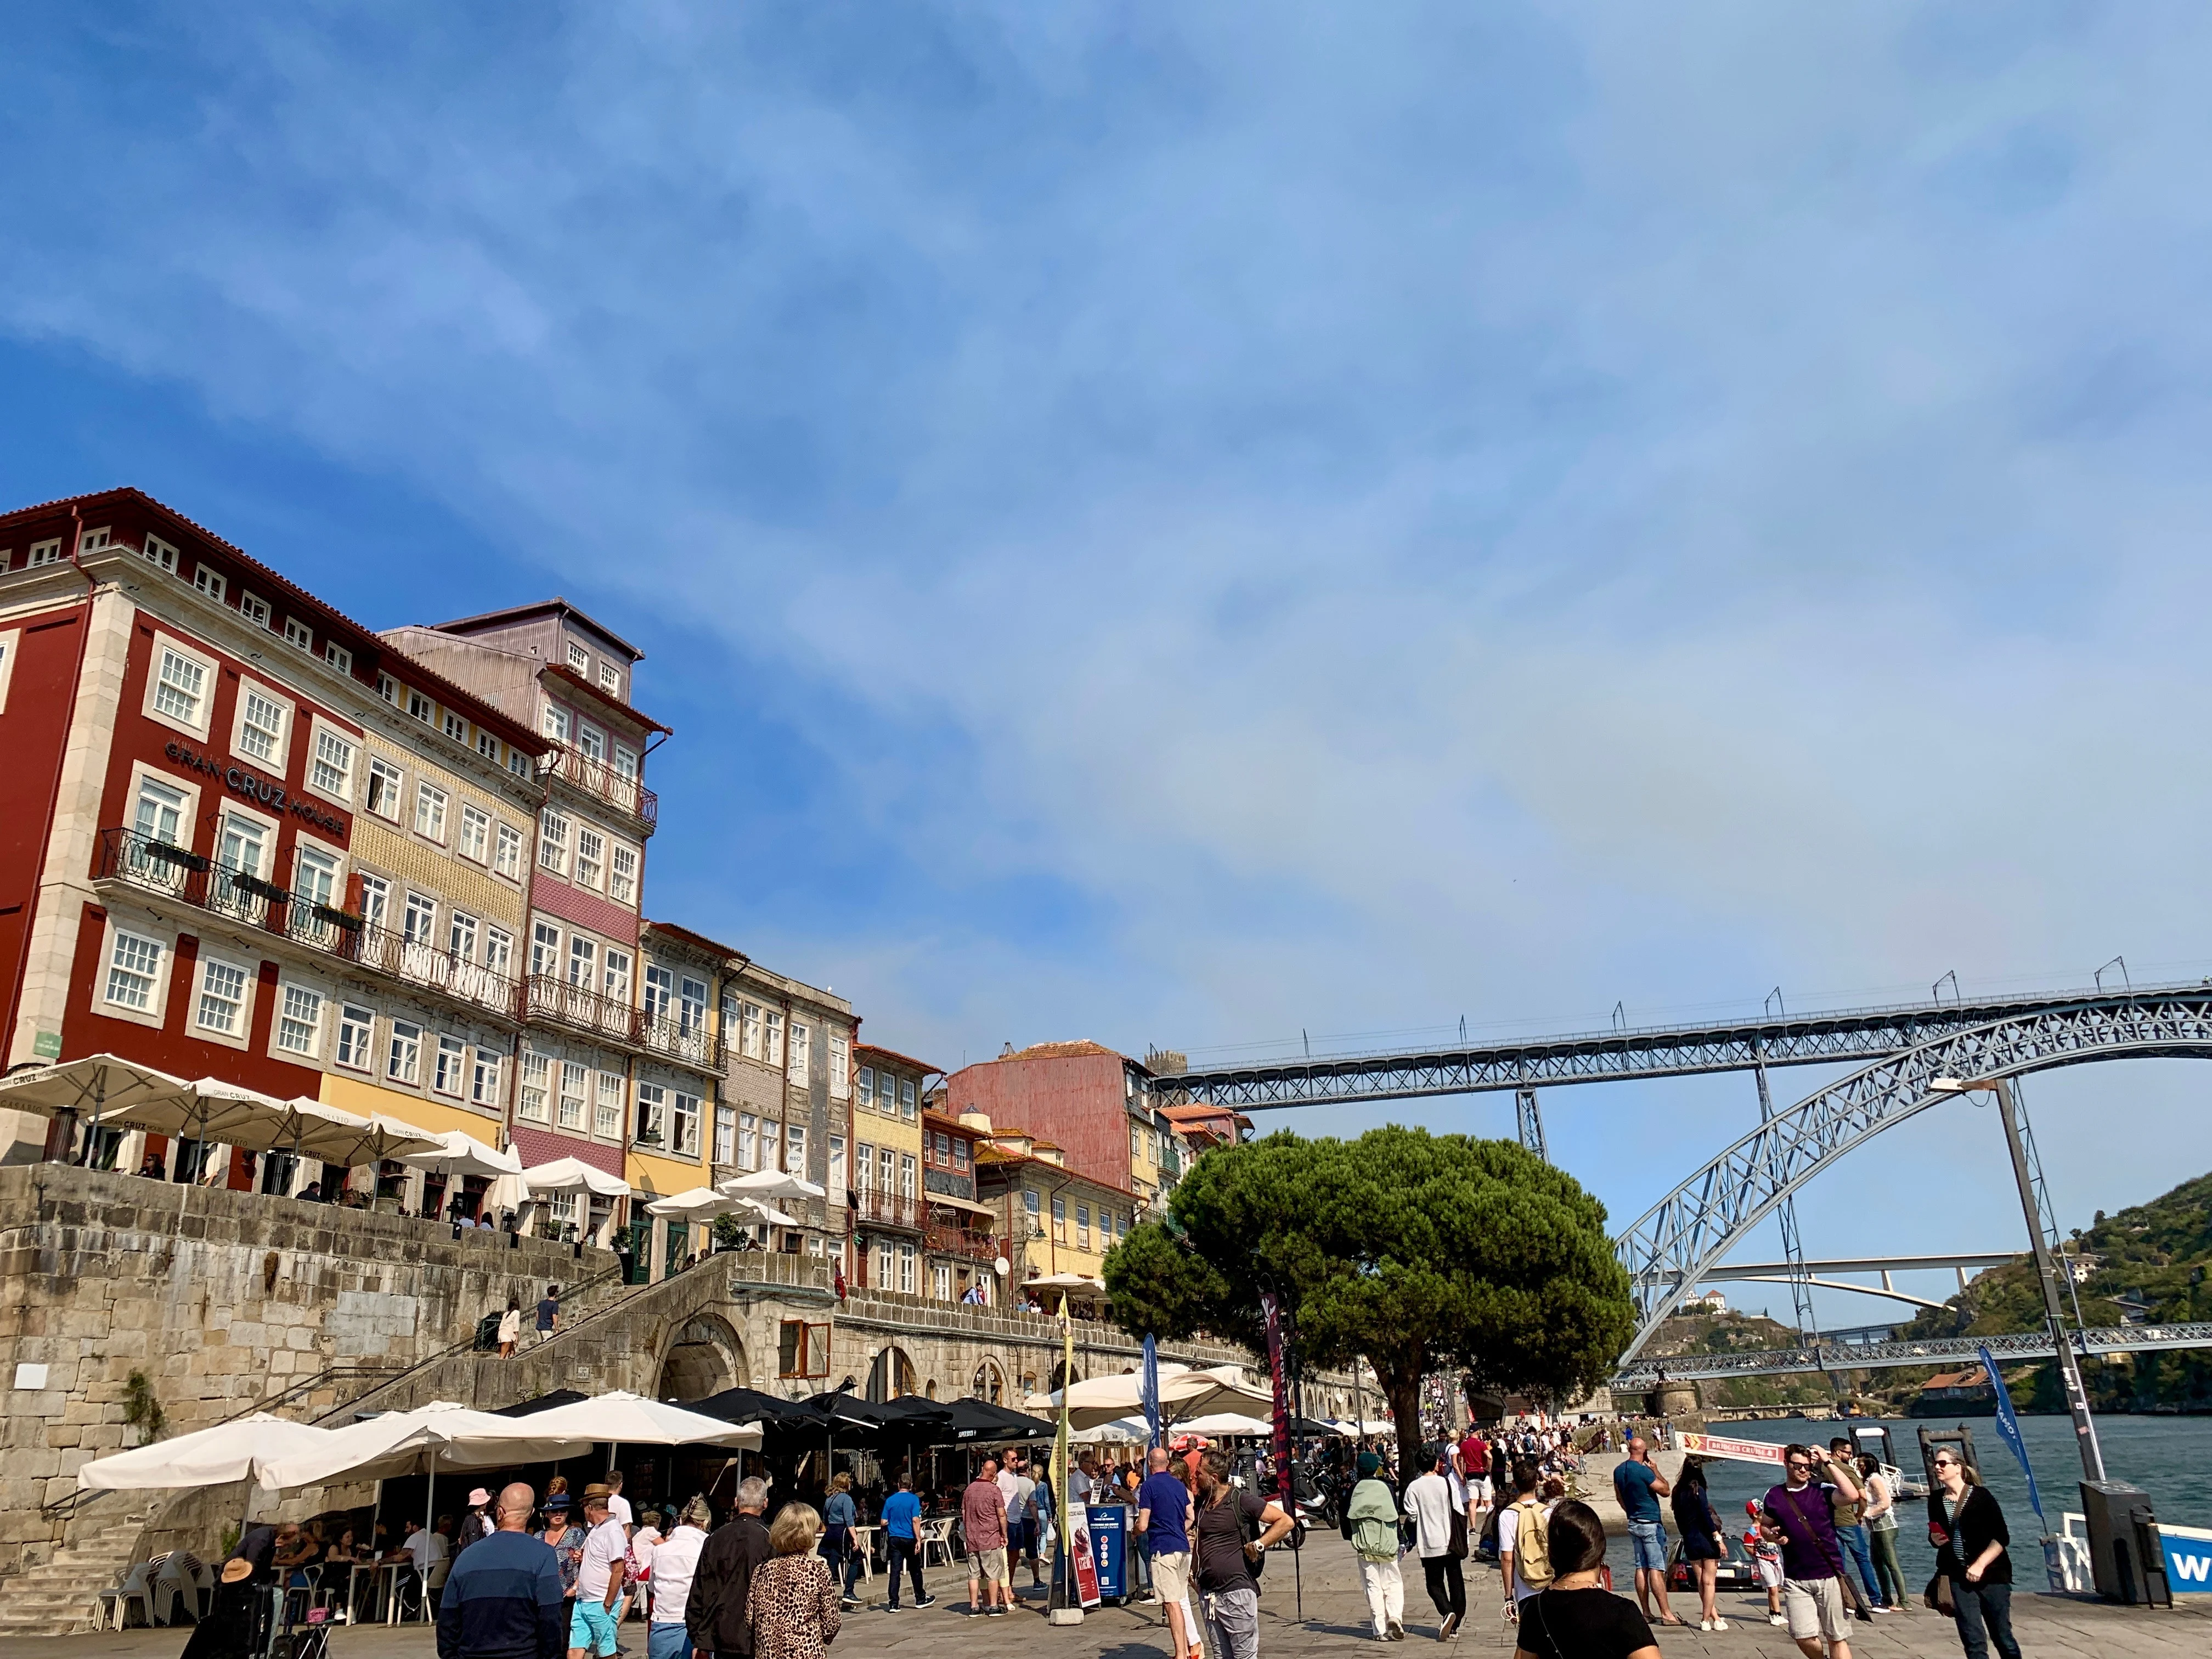 People walking along the Douro River in The Ribeira